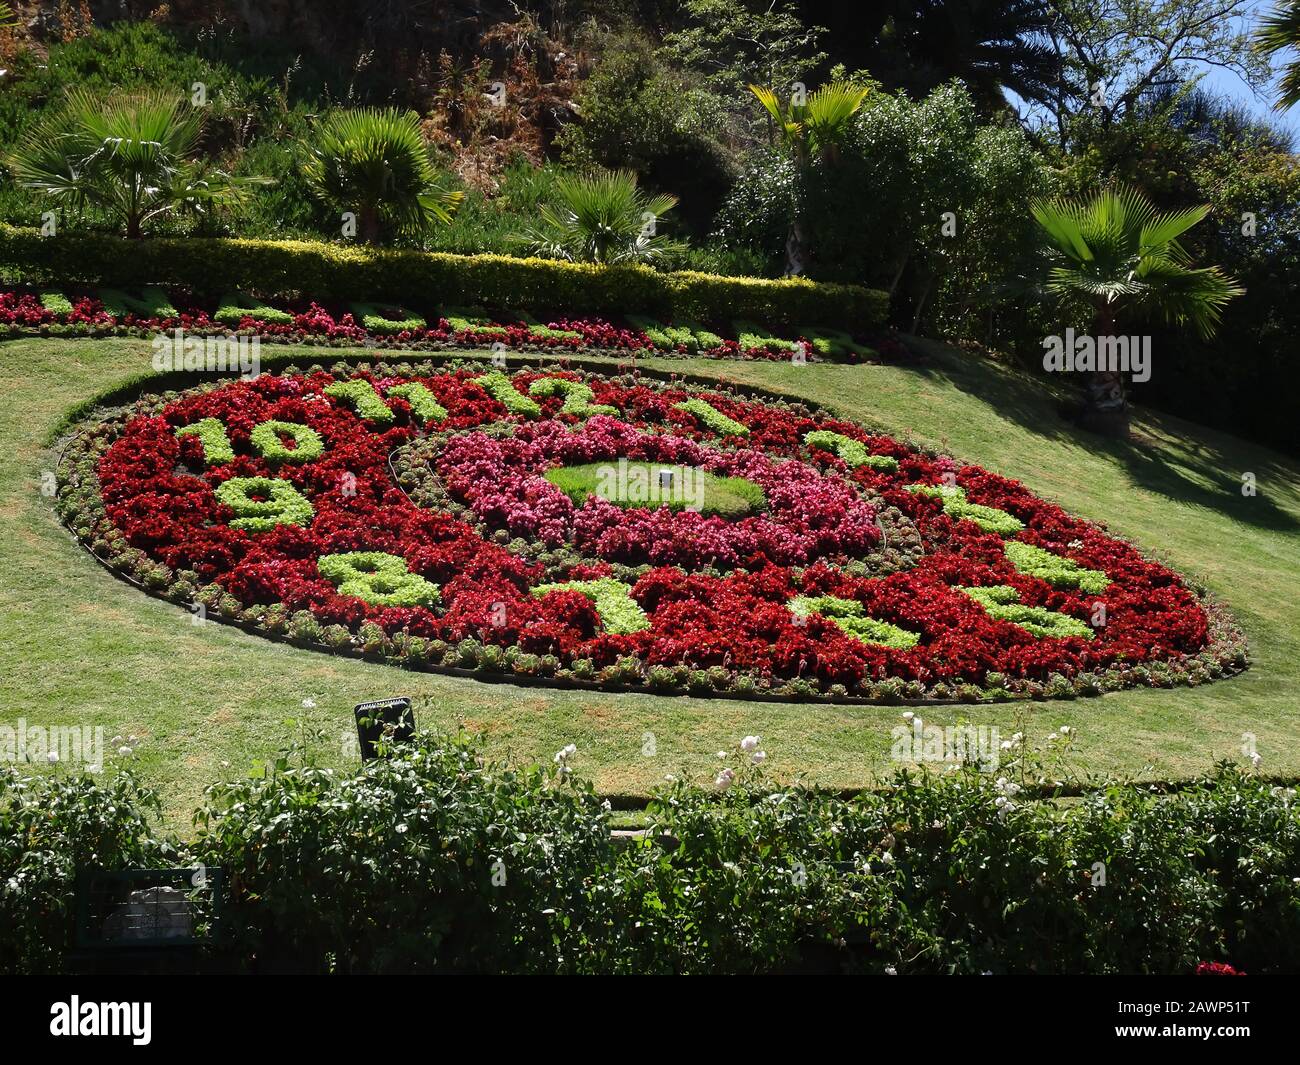 Flower clock located in Chile Stock Photo